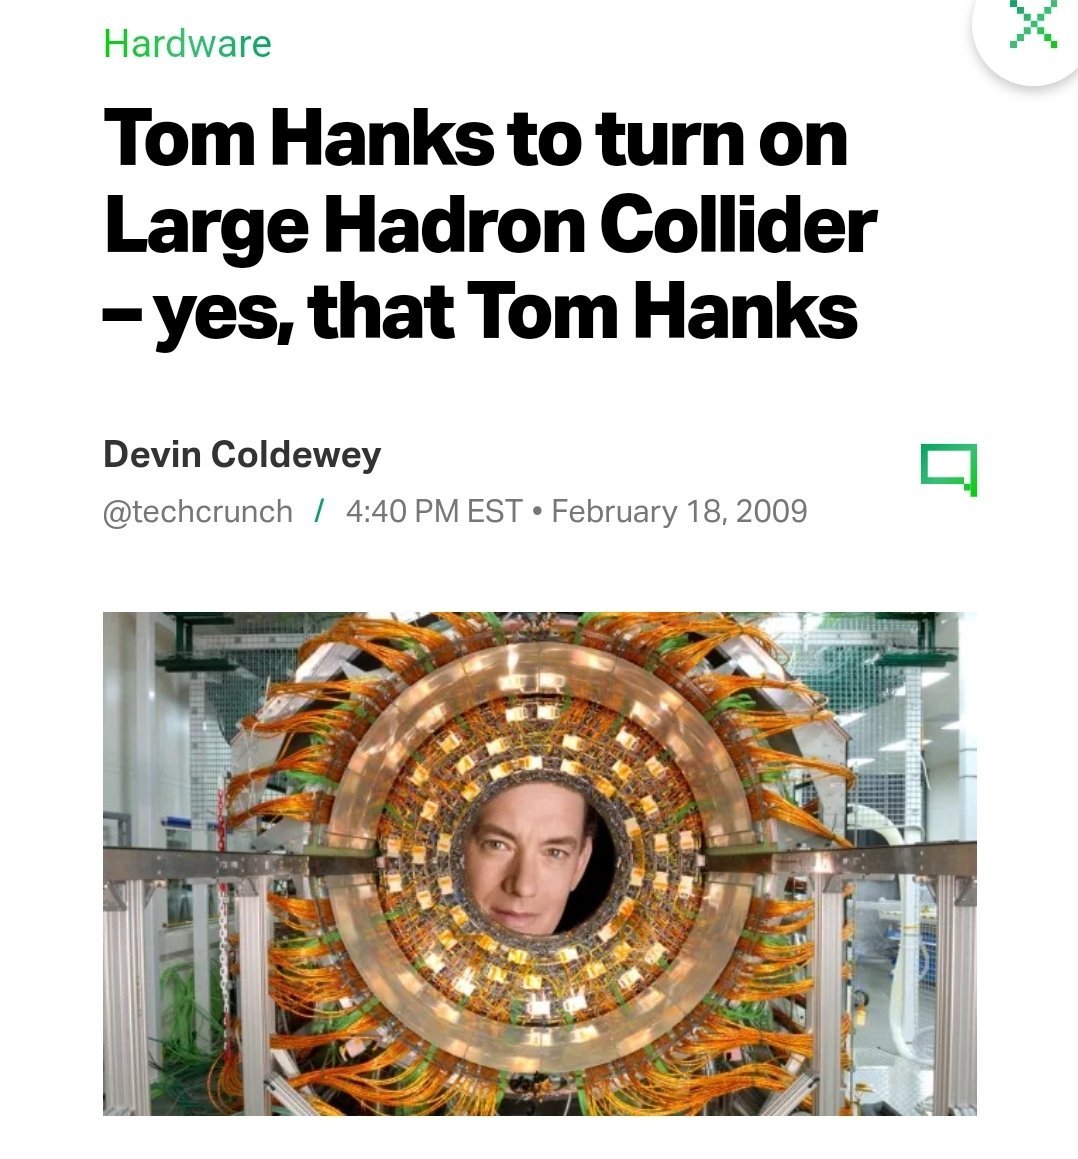 When digging down the CERN Mandela Effect rabbit-hole, Tom Hanks alone is involved with at least 6 notable incidents. Forrest gump: 'Mama always said life IS/WAS like a box of chocolates.' Forrest's mother is played by Sally Field, who people remember being Sally Fields, with an…